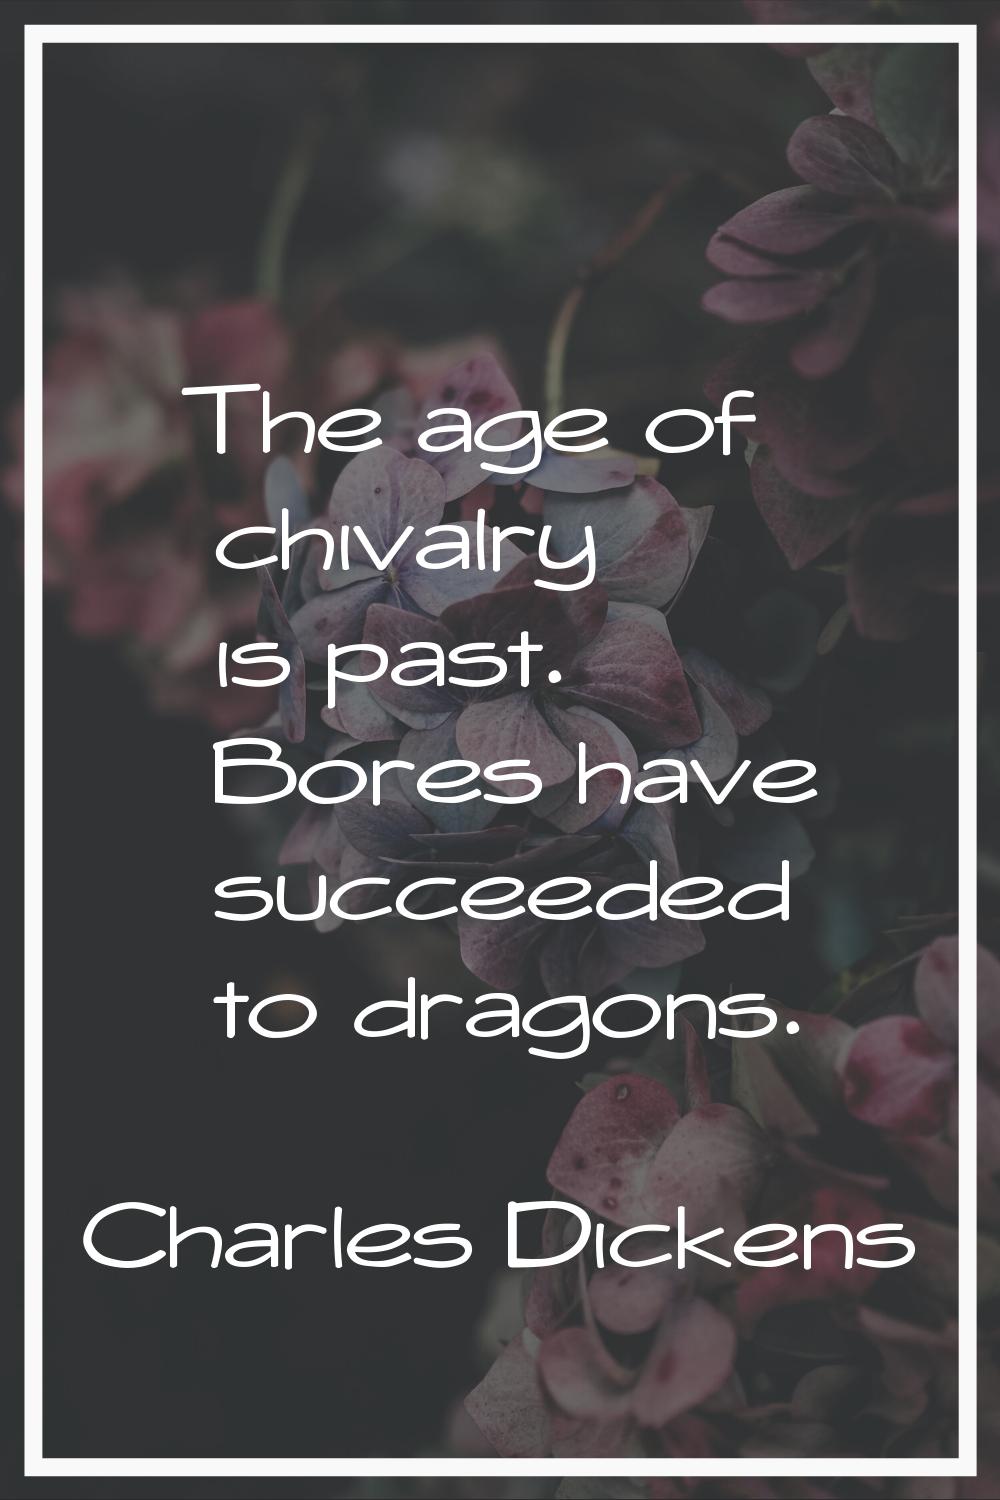 The age of chivalry is past. Bores have succeeded to dragons.